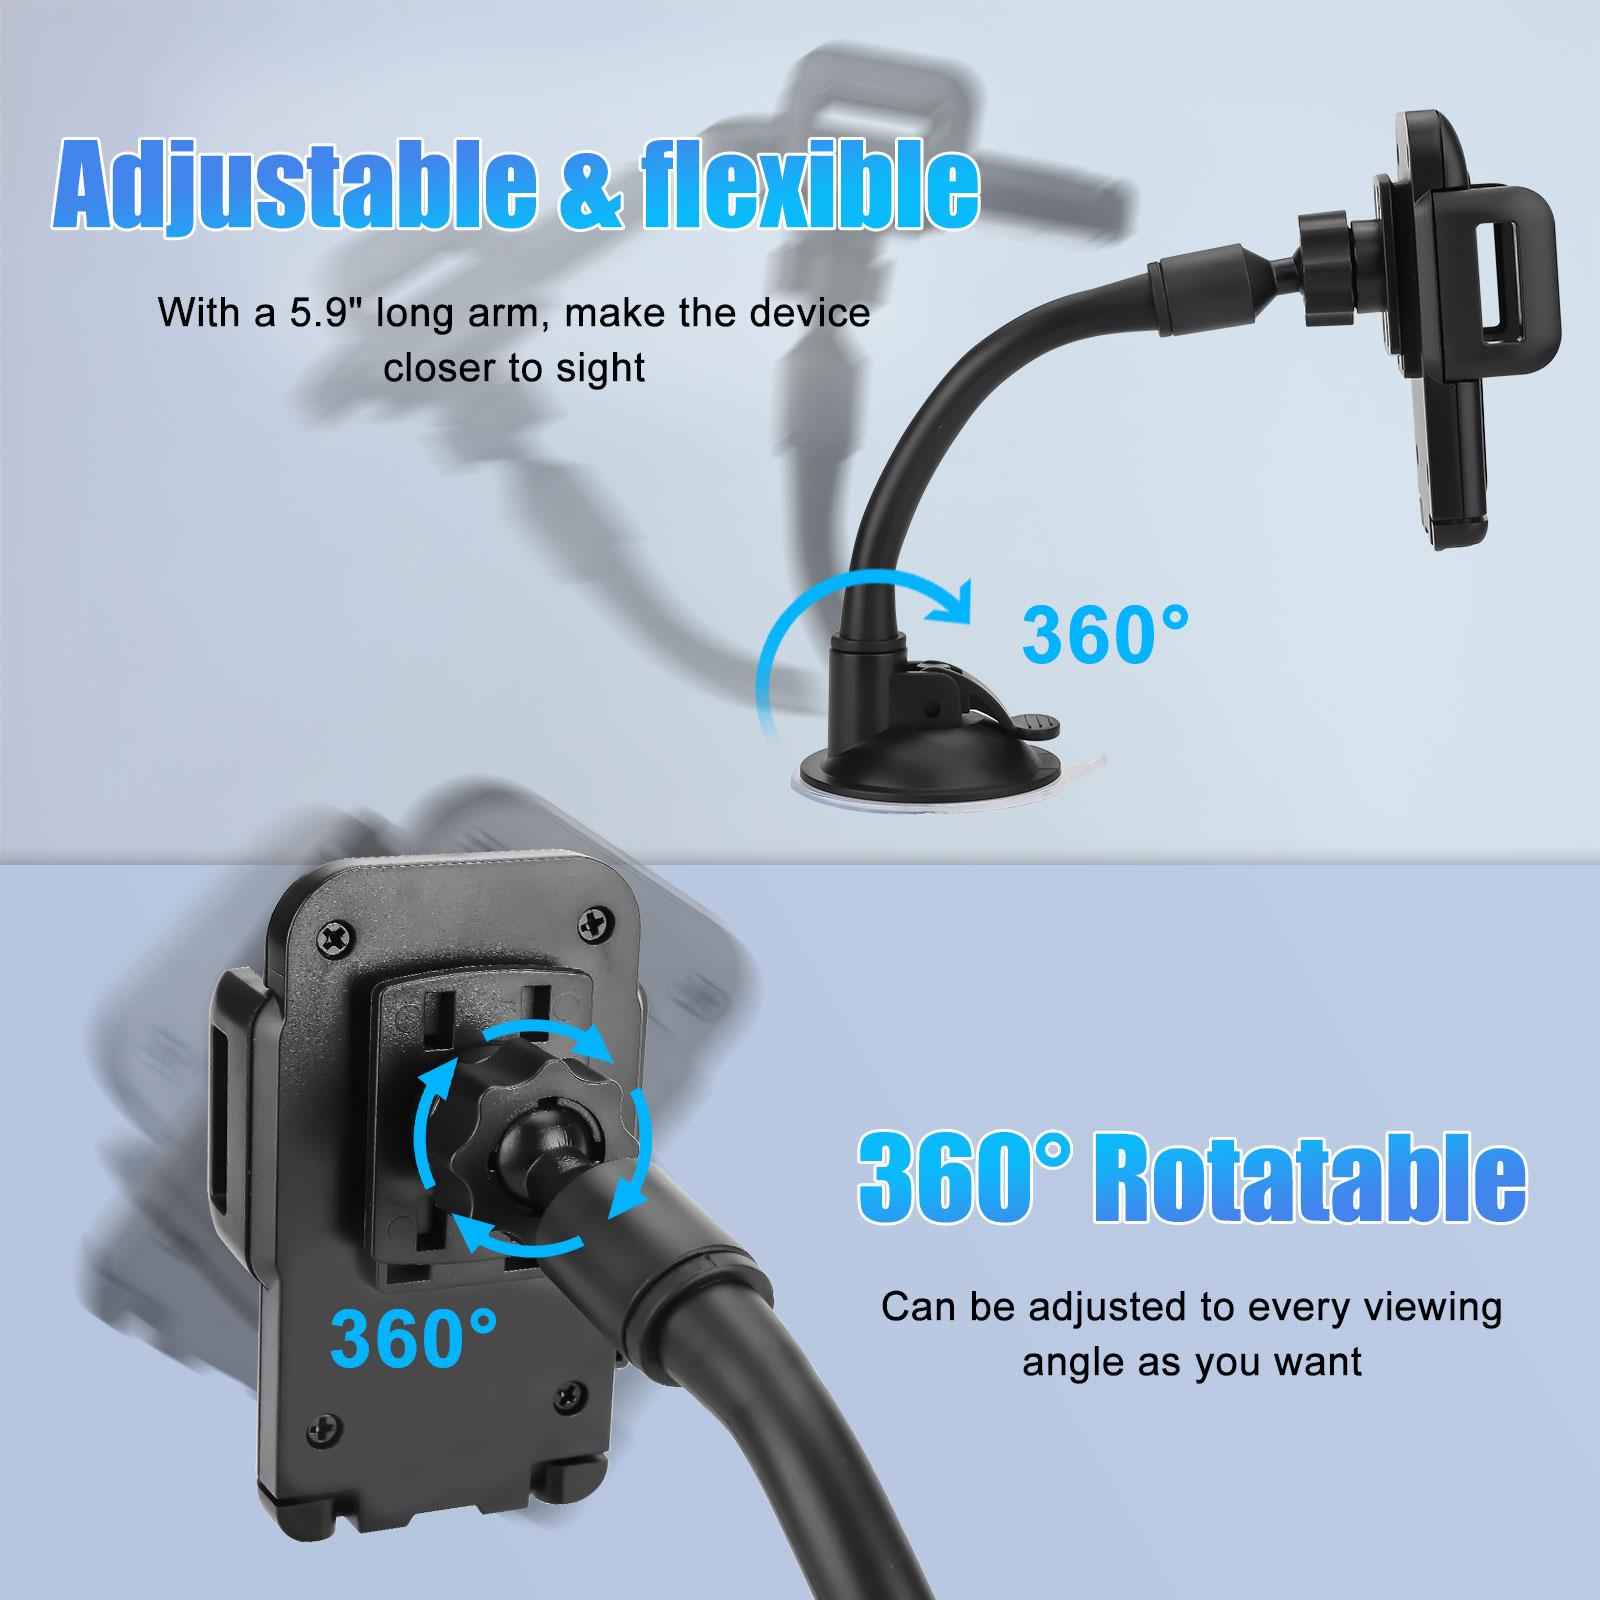 TSV Universal Car Windshield Dashboard Suction Cup 360 Degree Mount Holder Stand for Cellphones iPhone Android, Long Arm Car Phone Holder Windscreen Car Cradle - image 2 of 9